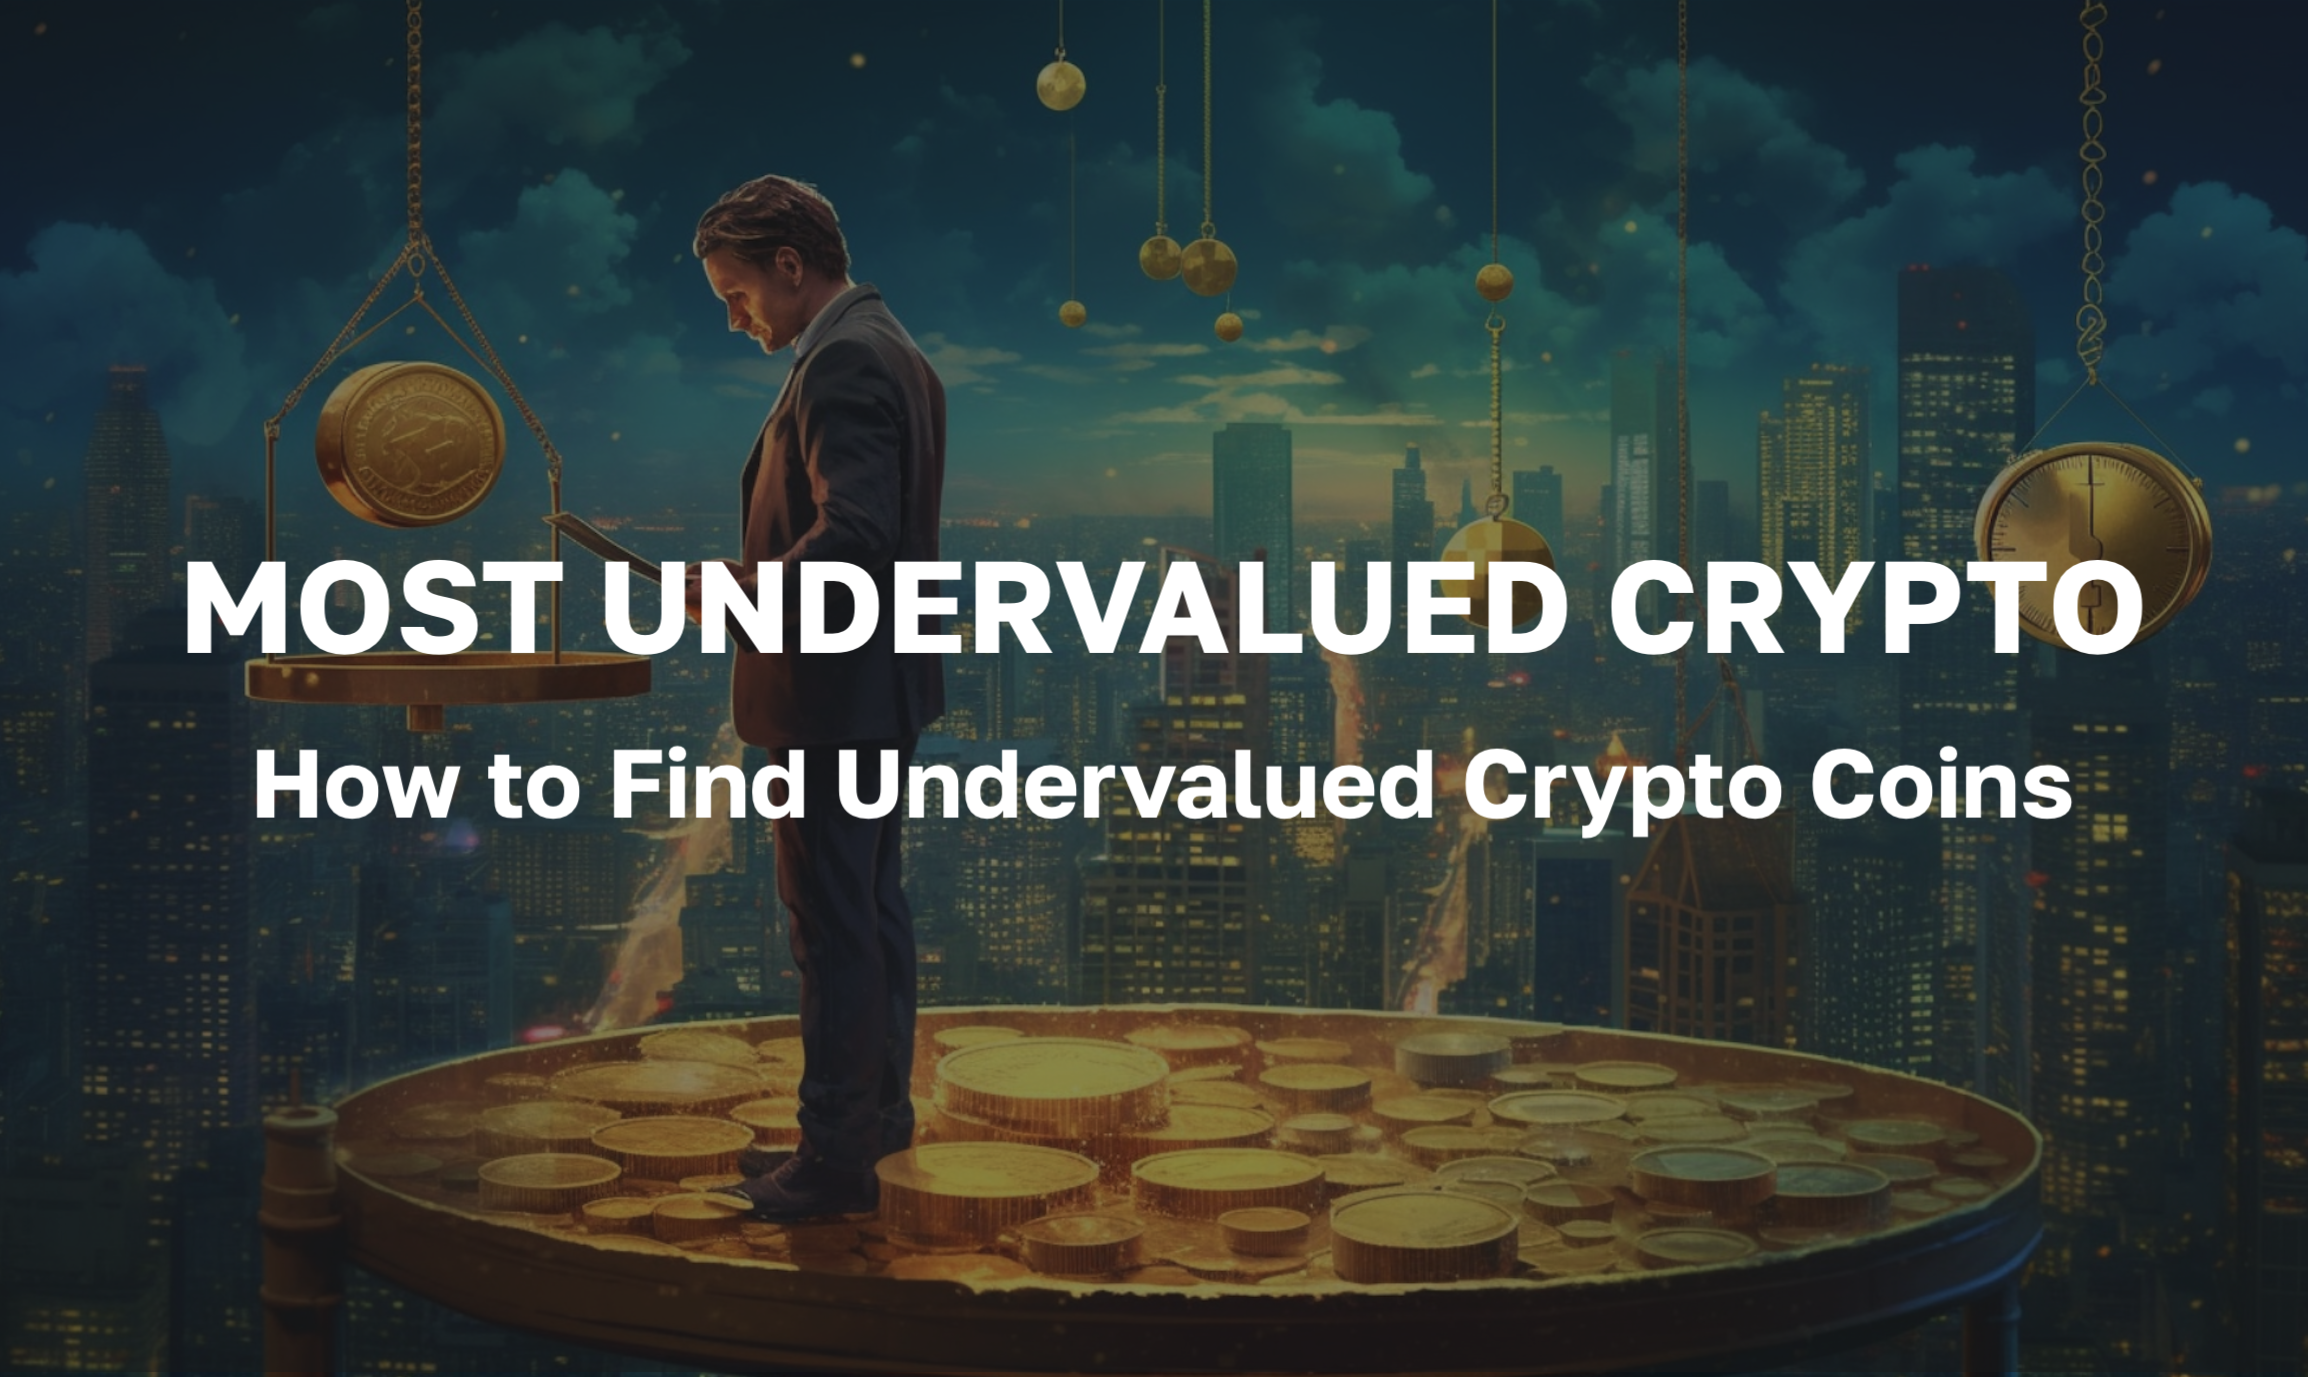 Best Undervalued Crypto Coins